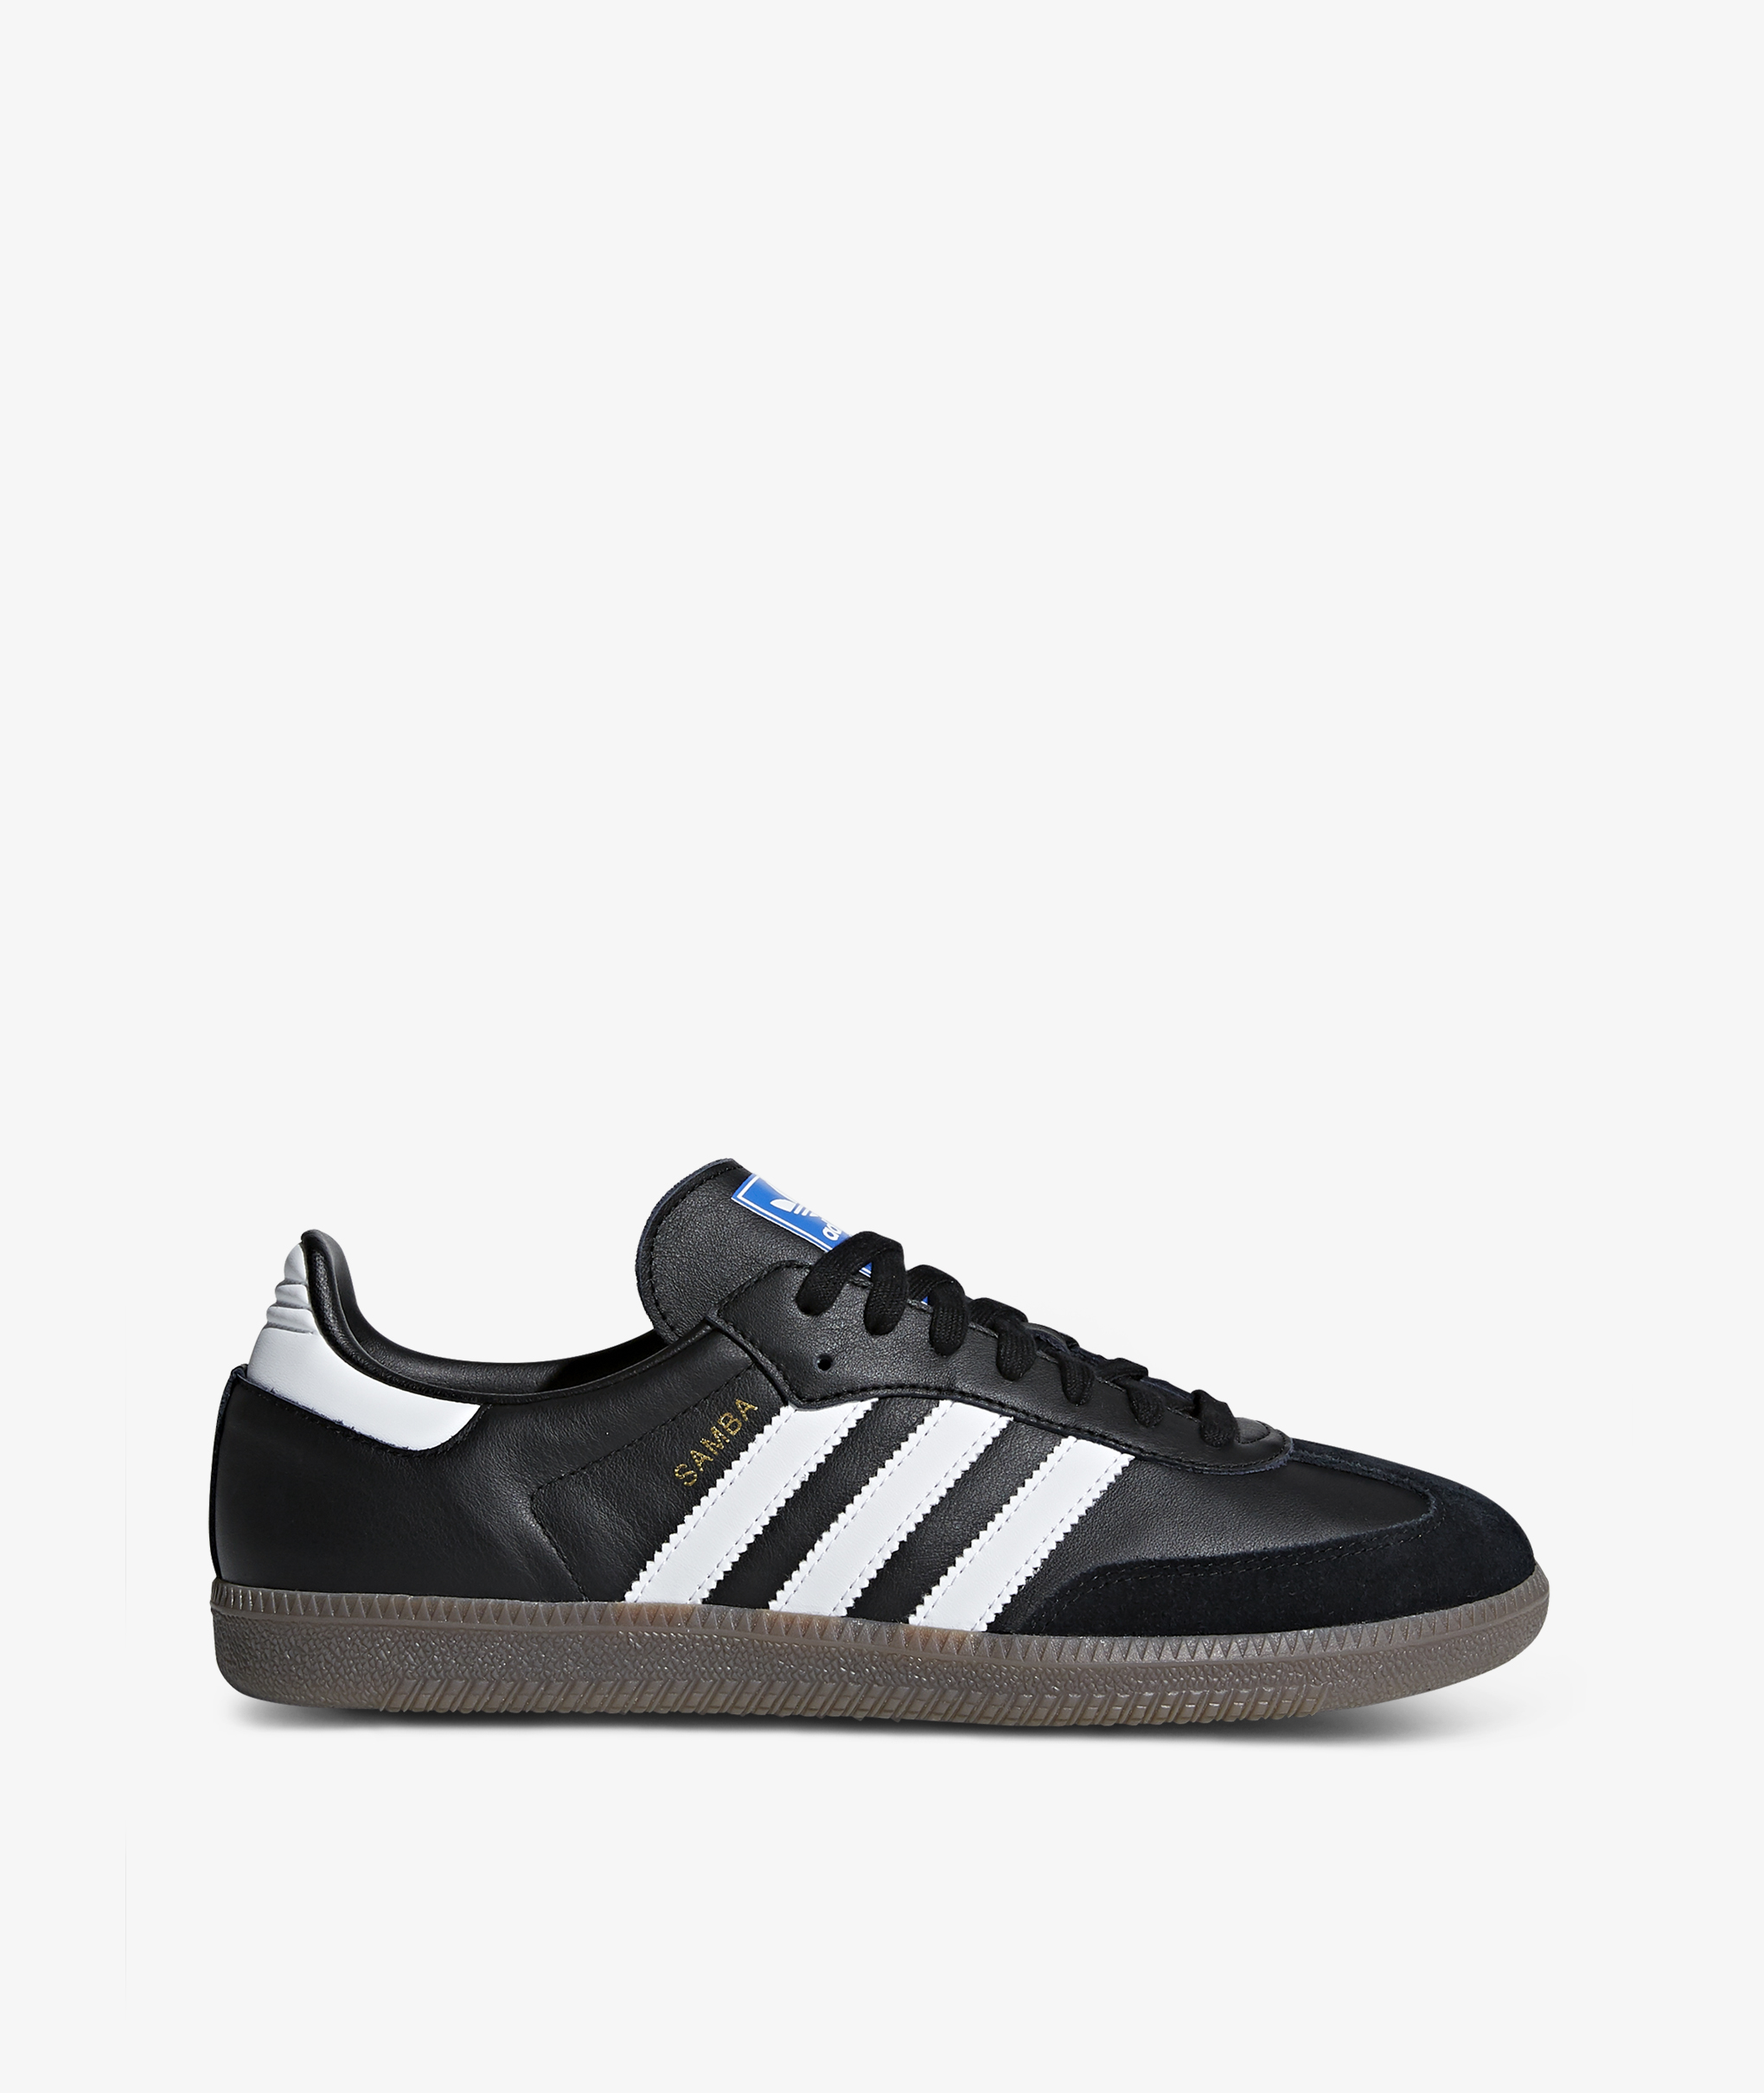 Shop the adidas Samba trainer selection & get the latest release dates